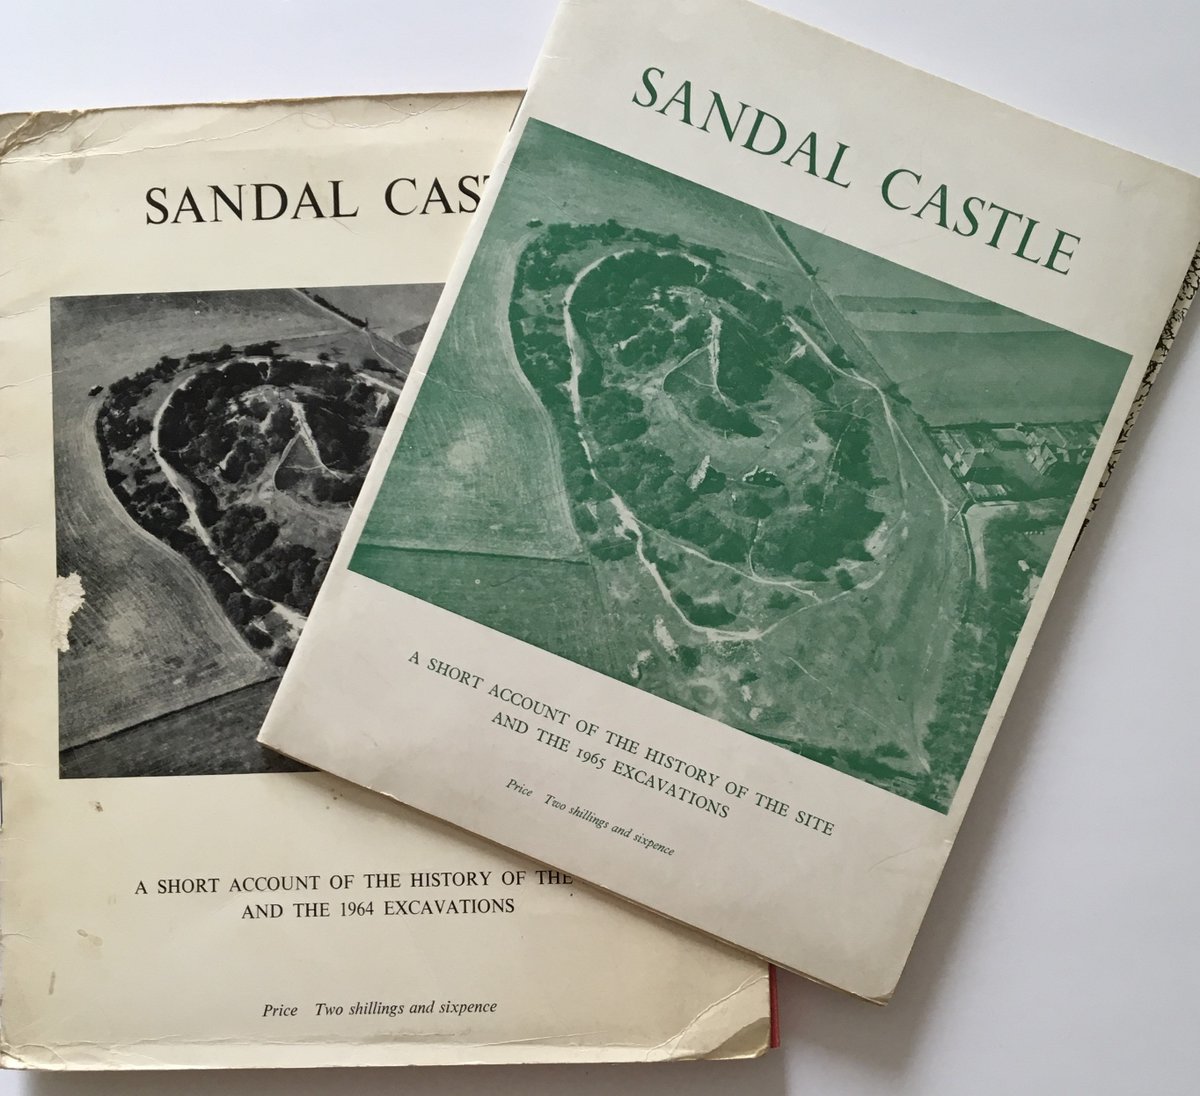 100 Years of Wakefield Historical Society. Sandal Castle was a focus for the Society in the 1960s and 70s. It attracted many new members both young and older. Here are two early Excavation Reports, more were to follow. @WFlibraries @WakefieldCivicS @Expwakefield @WFMuseums